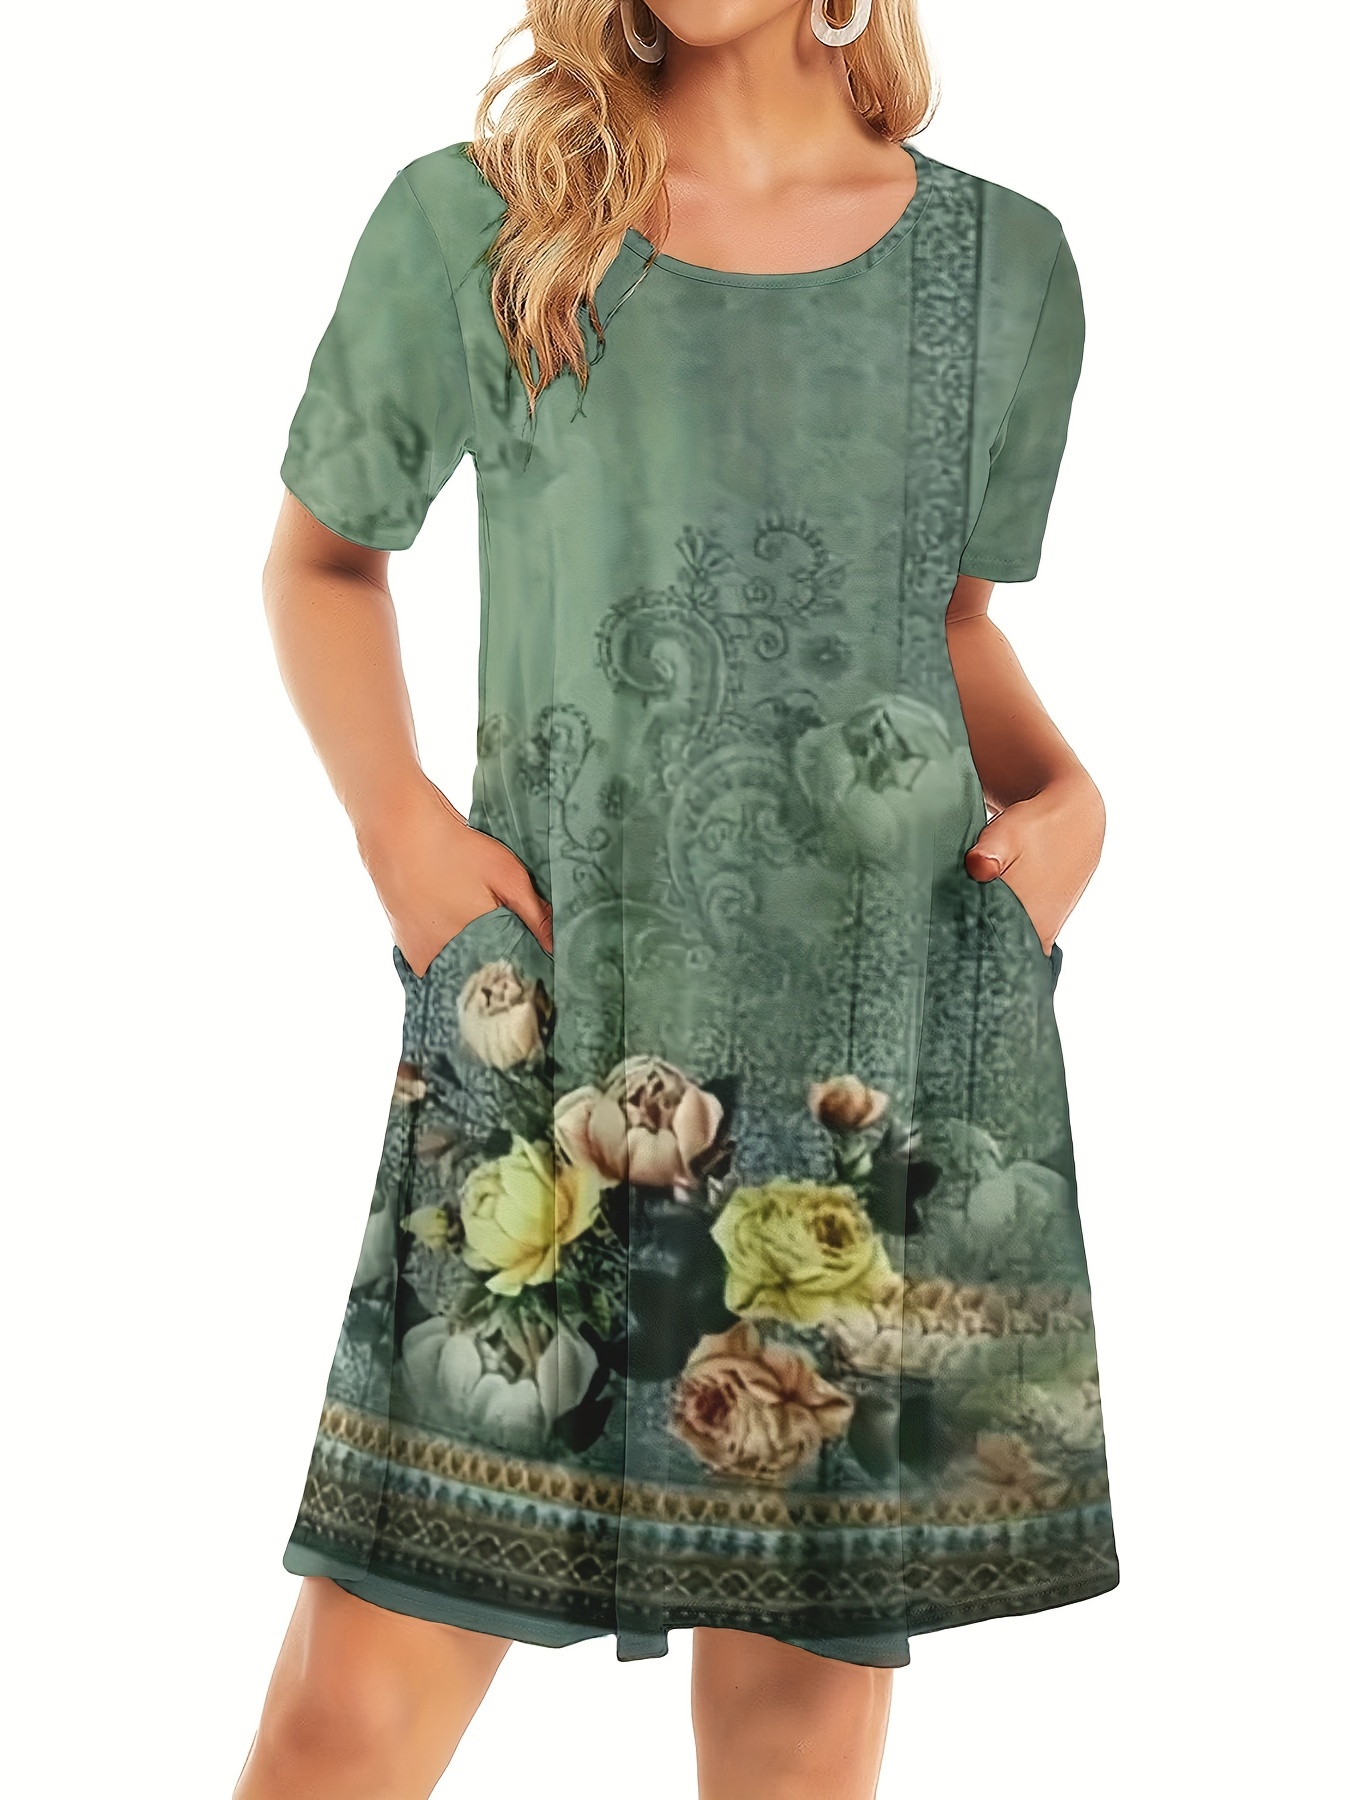 floral print short sleeve dress casual crew neck dress for spring summer womens clothing